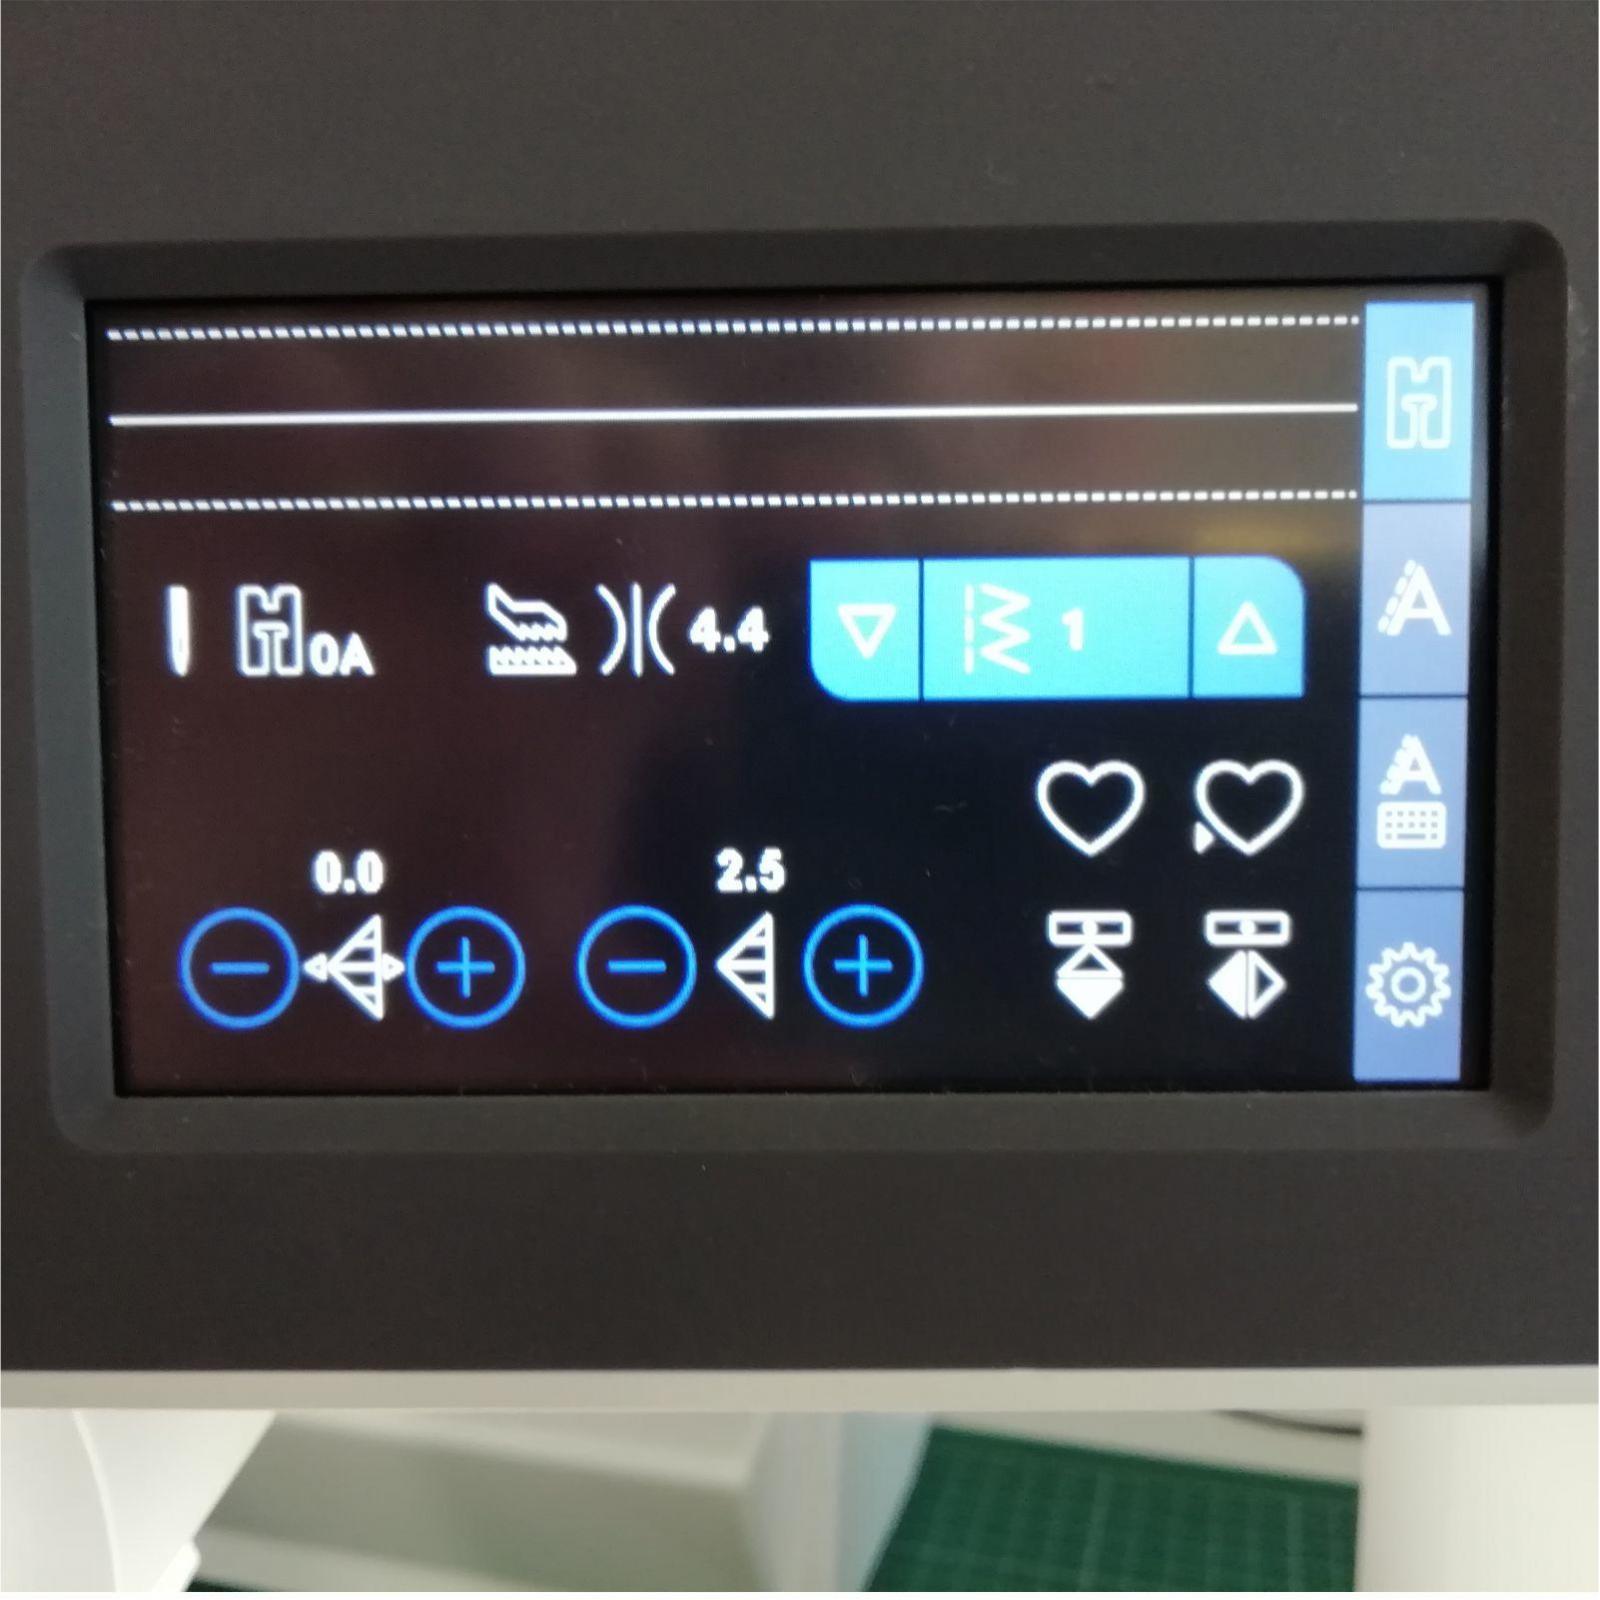 The Pfaff Quilt Ambition 630 has a colour touch screen